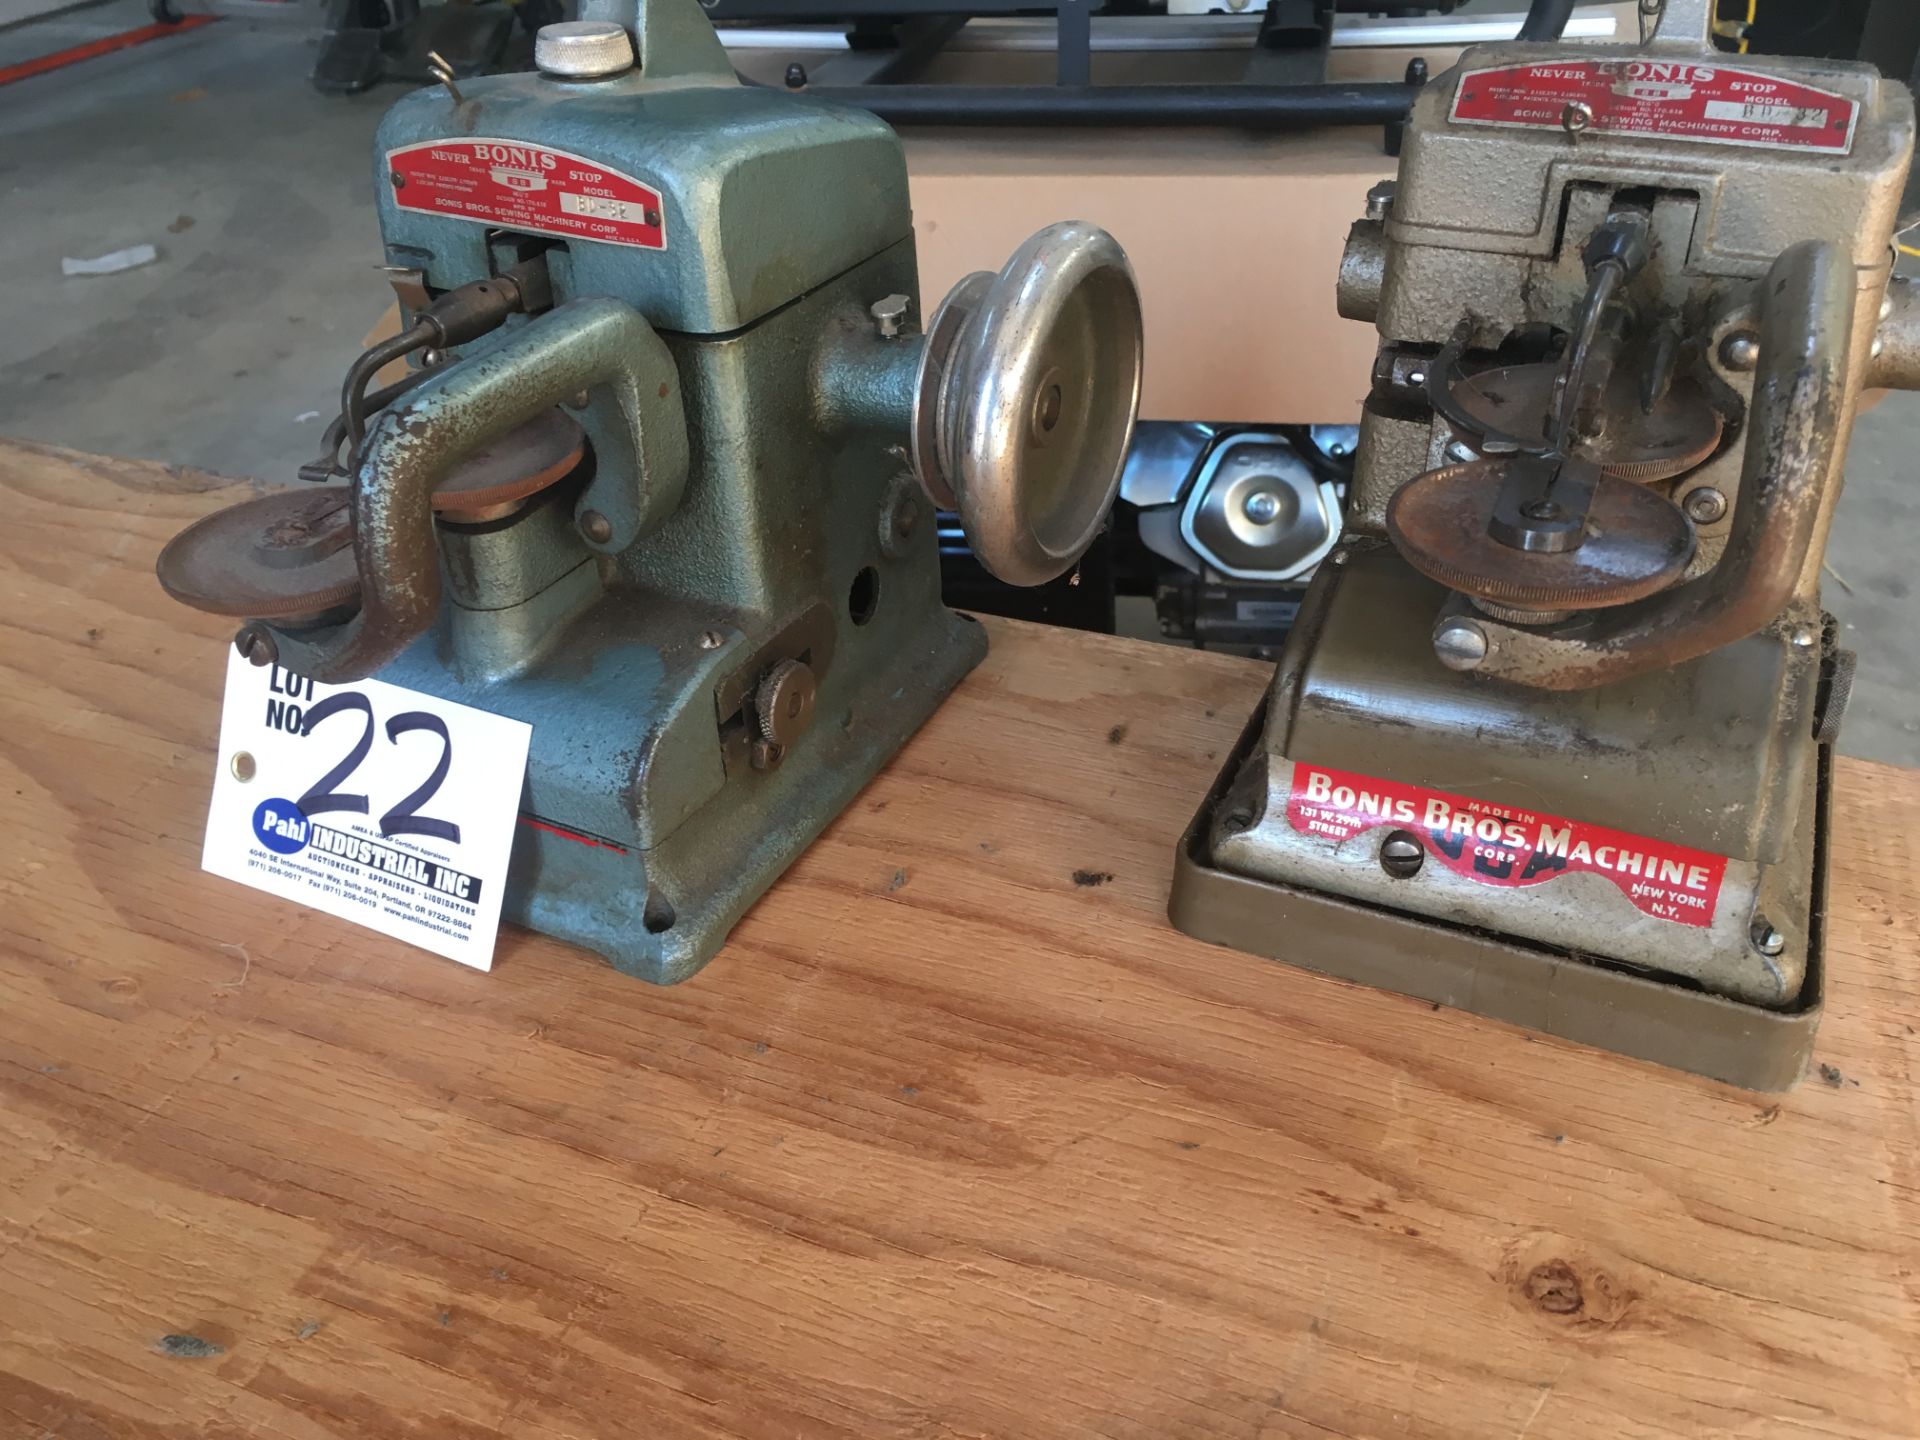 (2) Bonis BD-32 Fur Sewing machines (not known if operational) - Image 2 of 4